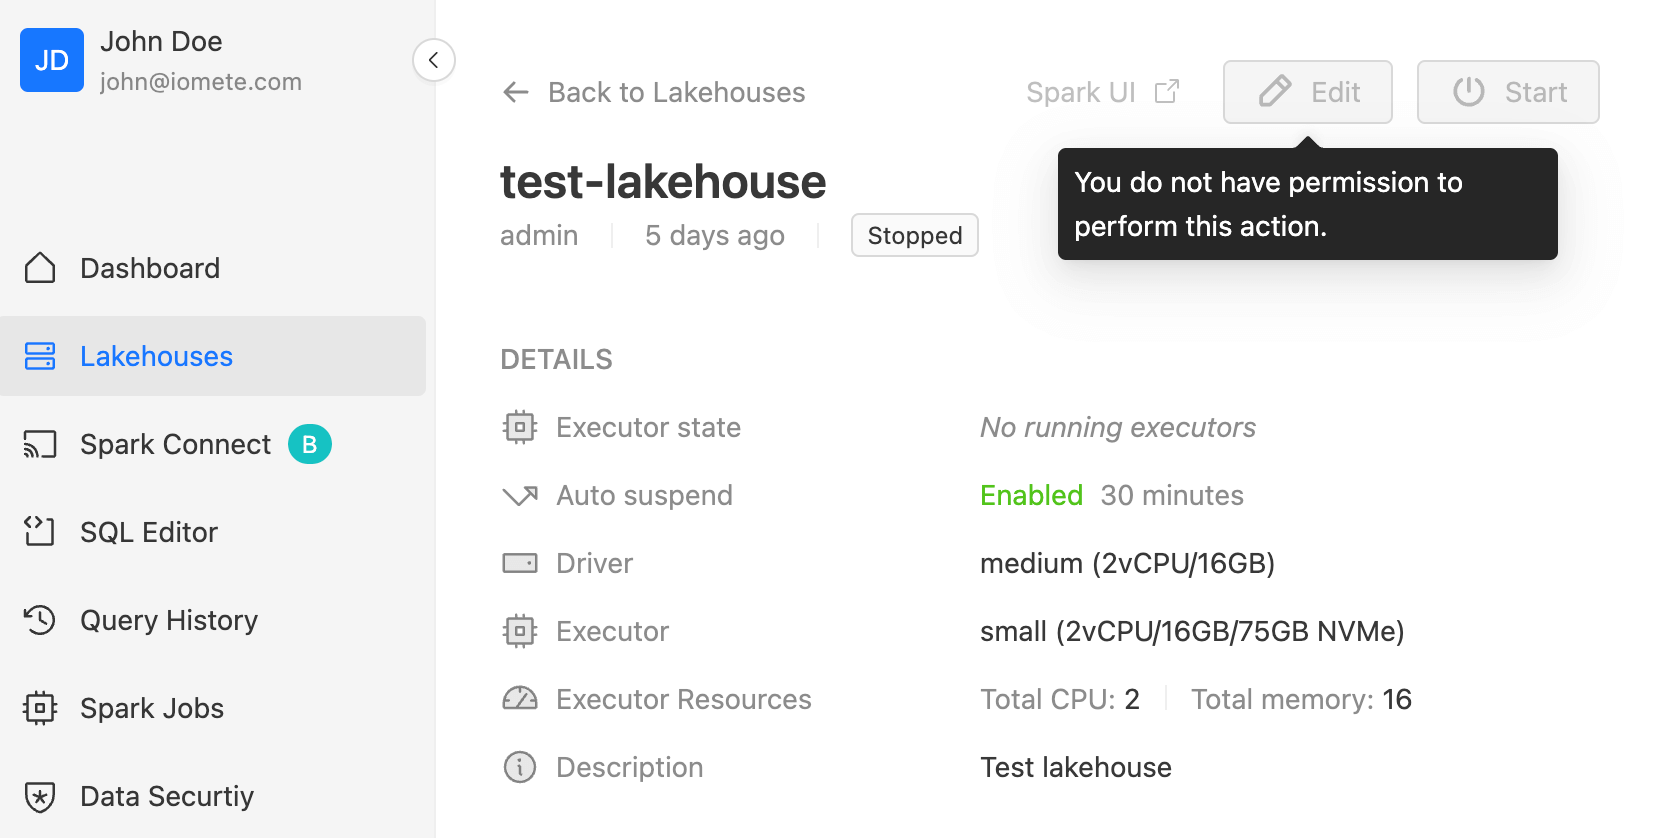 Lakehouse can manage role | IOMETE